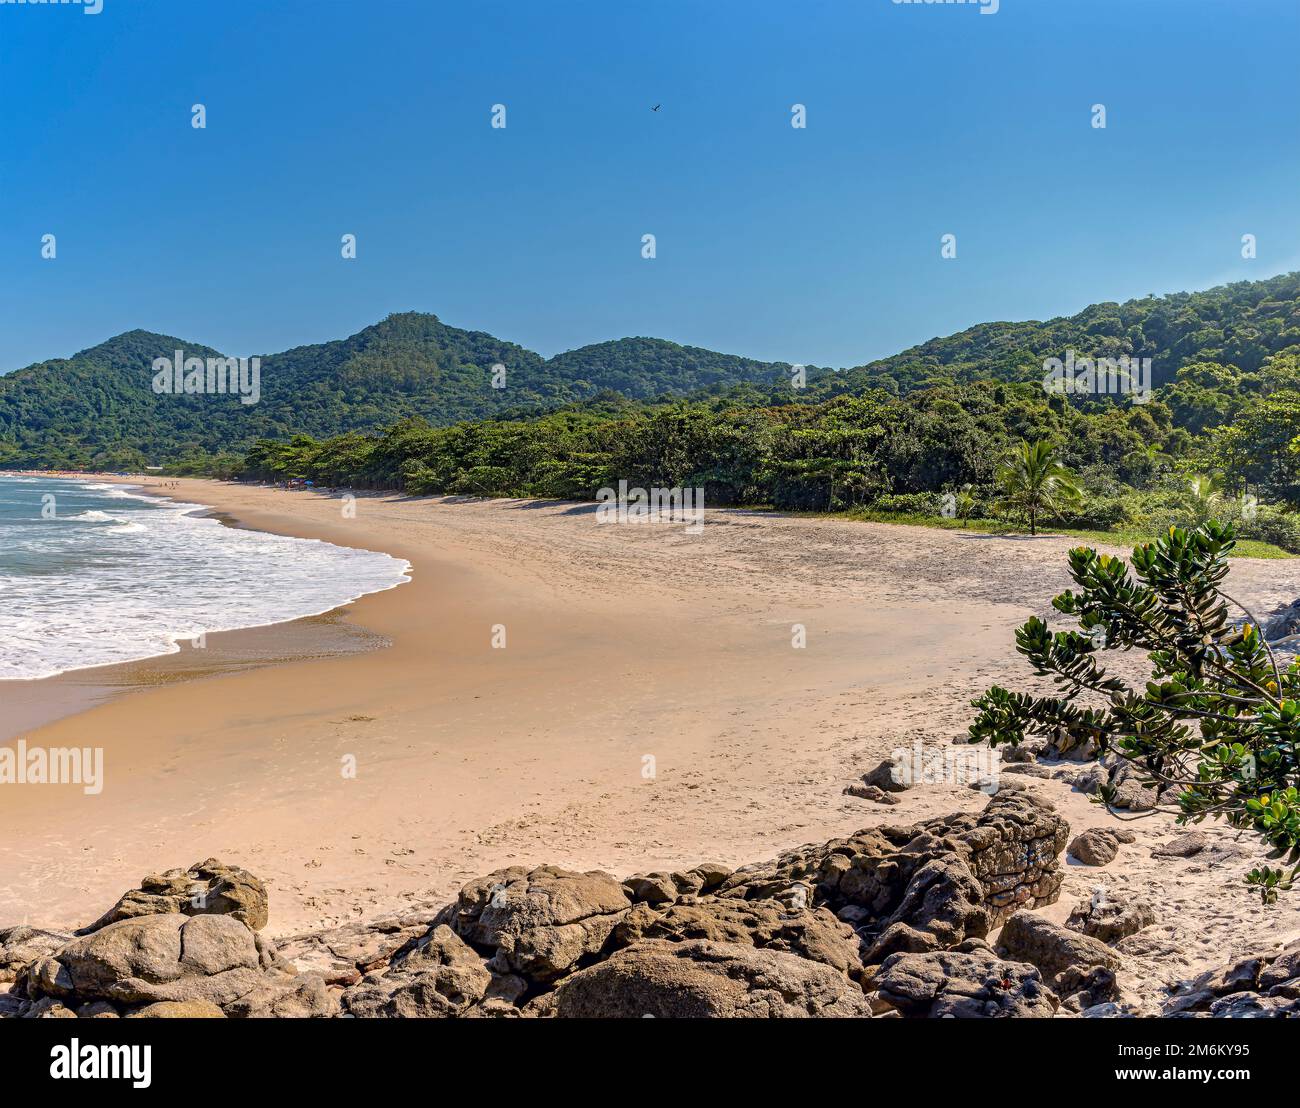 Beach surrounded by untouched forest and mountains Stock Photo